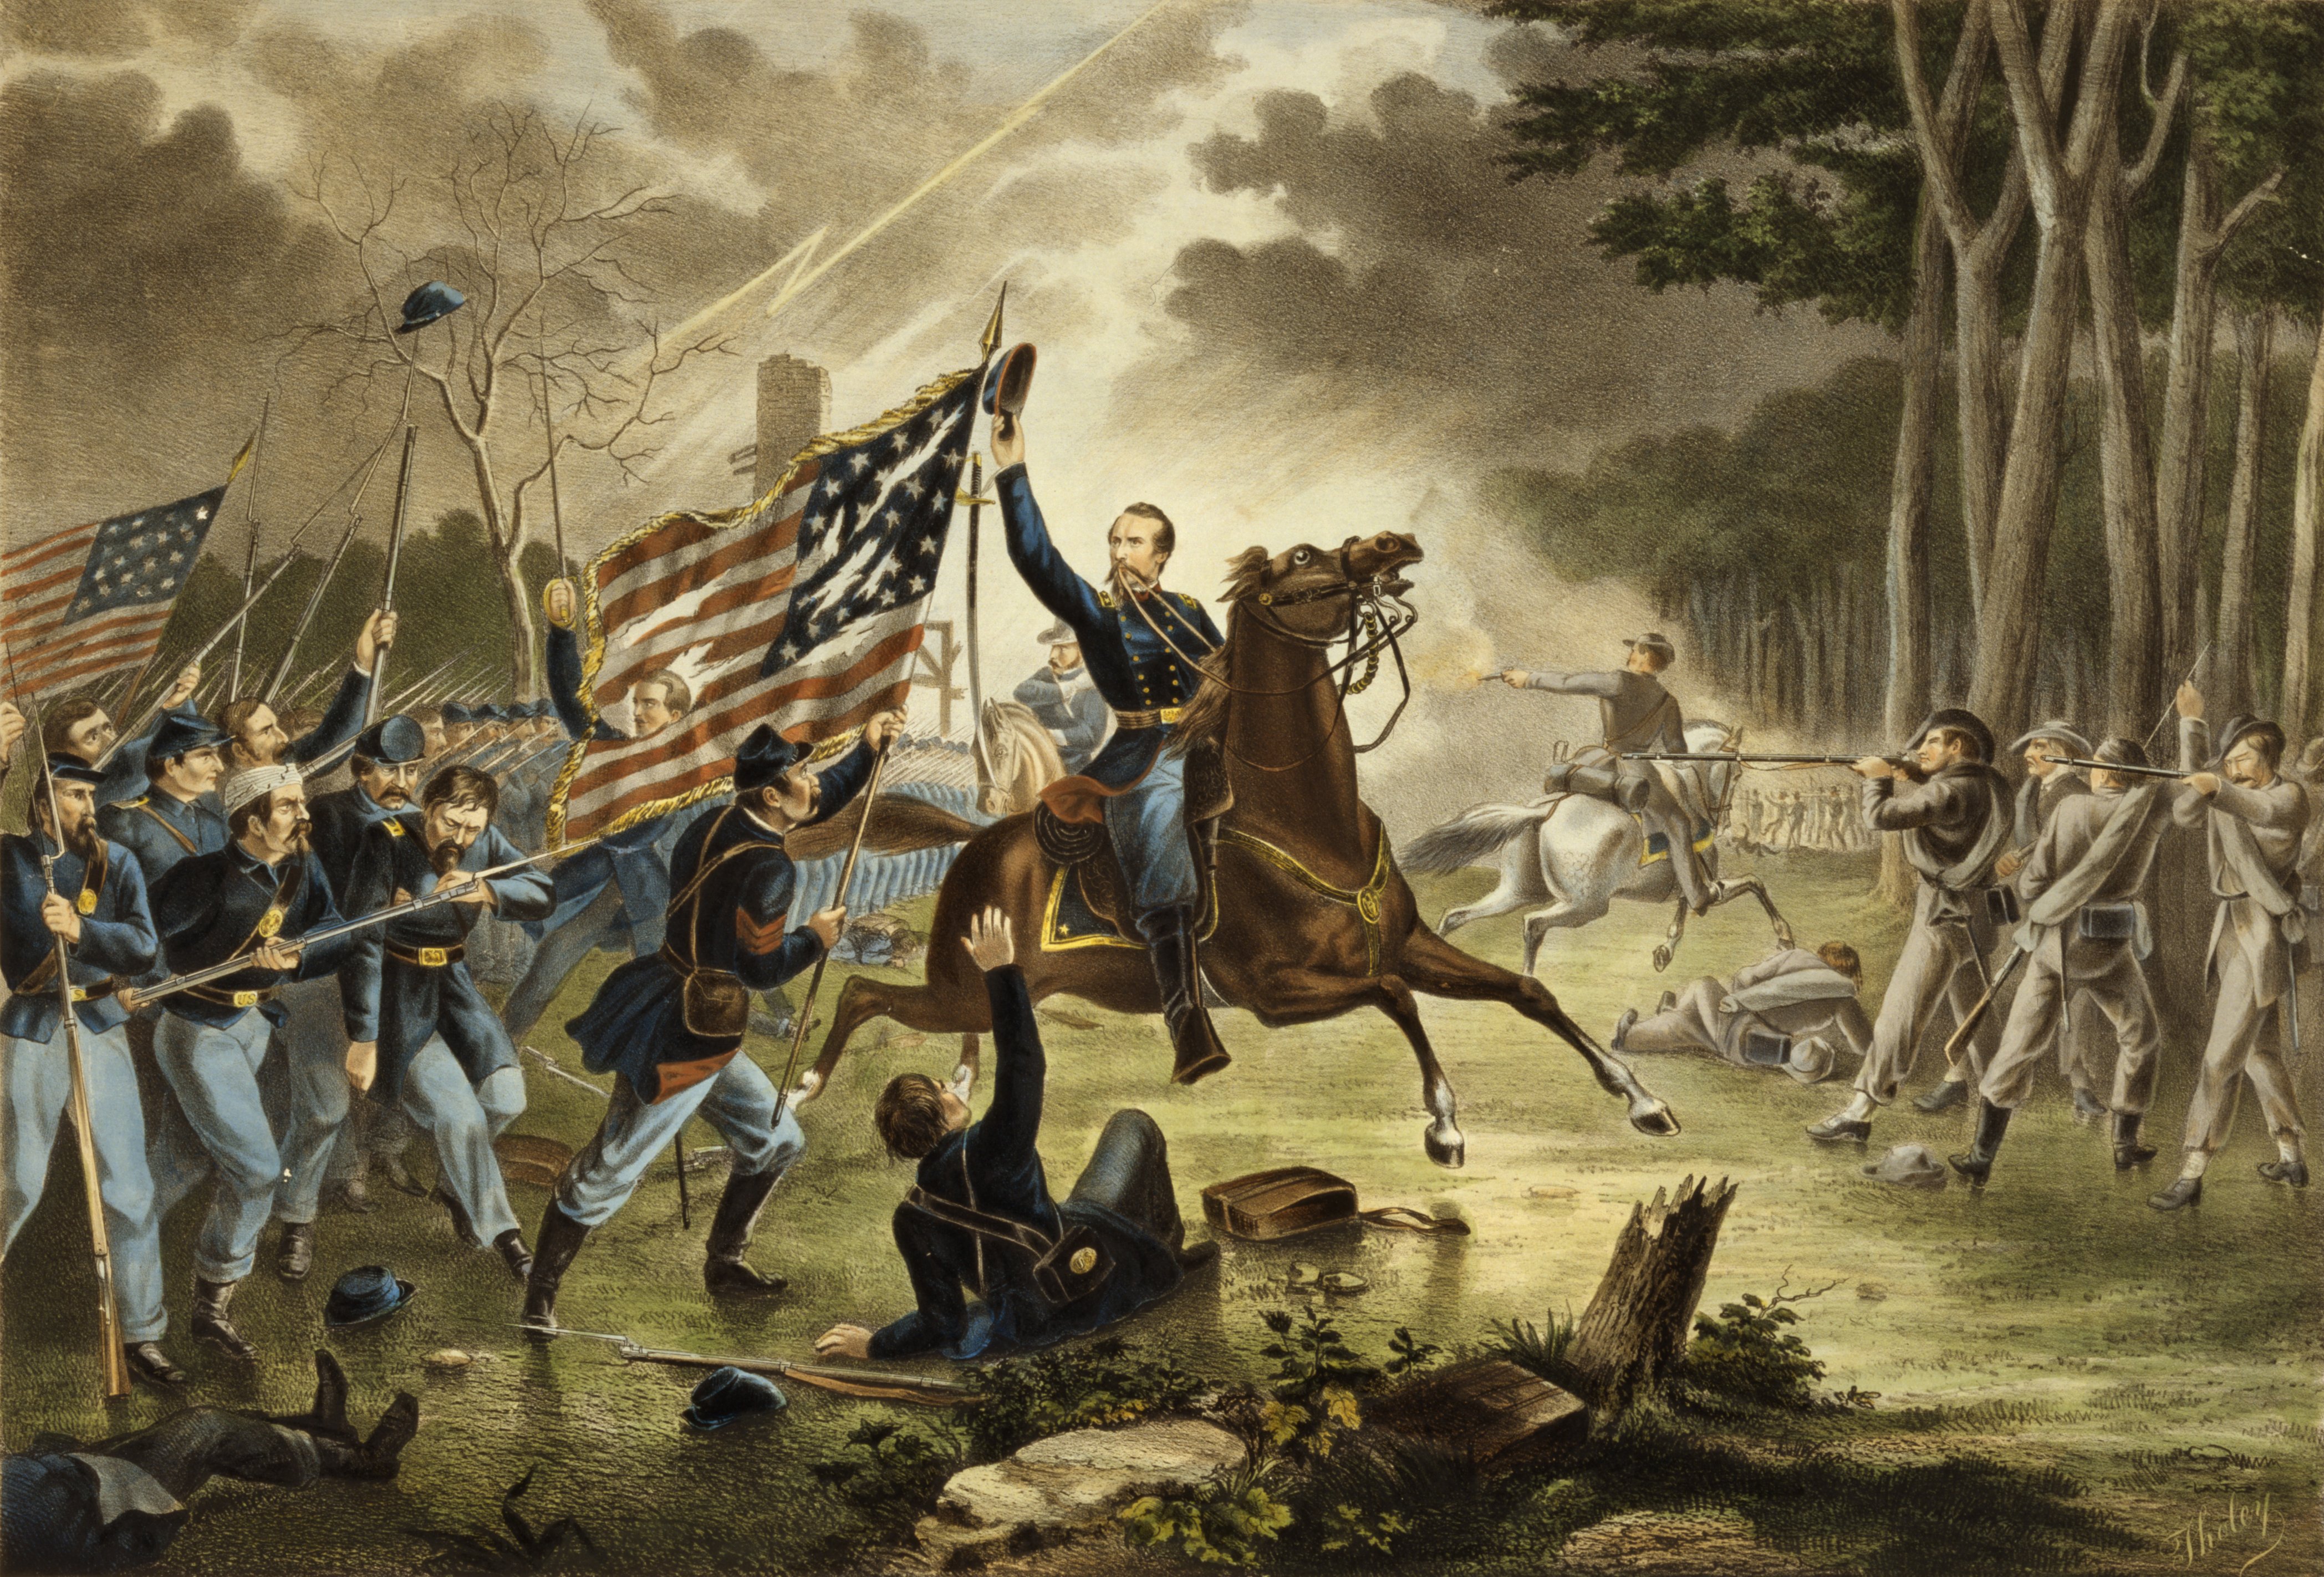 Kearny's Charge, Battle of Chantilly